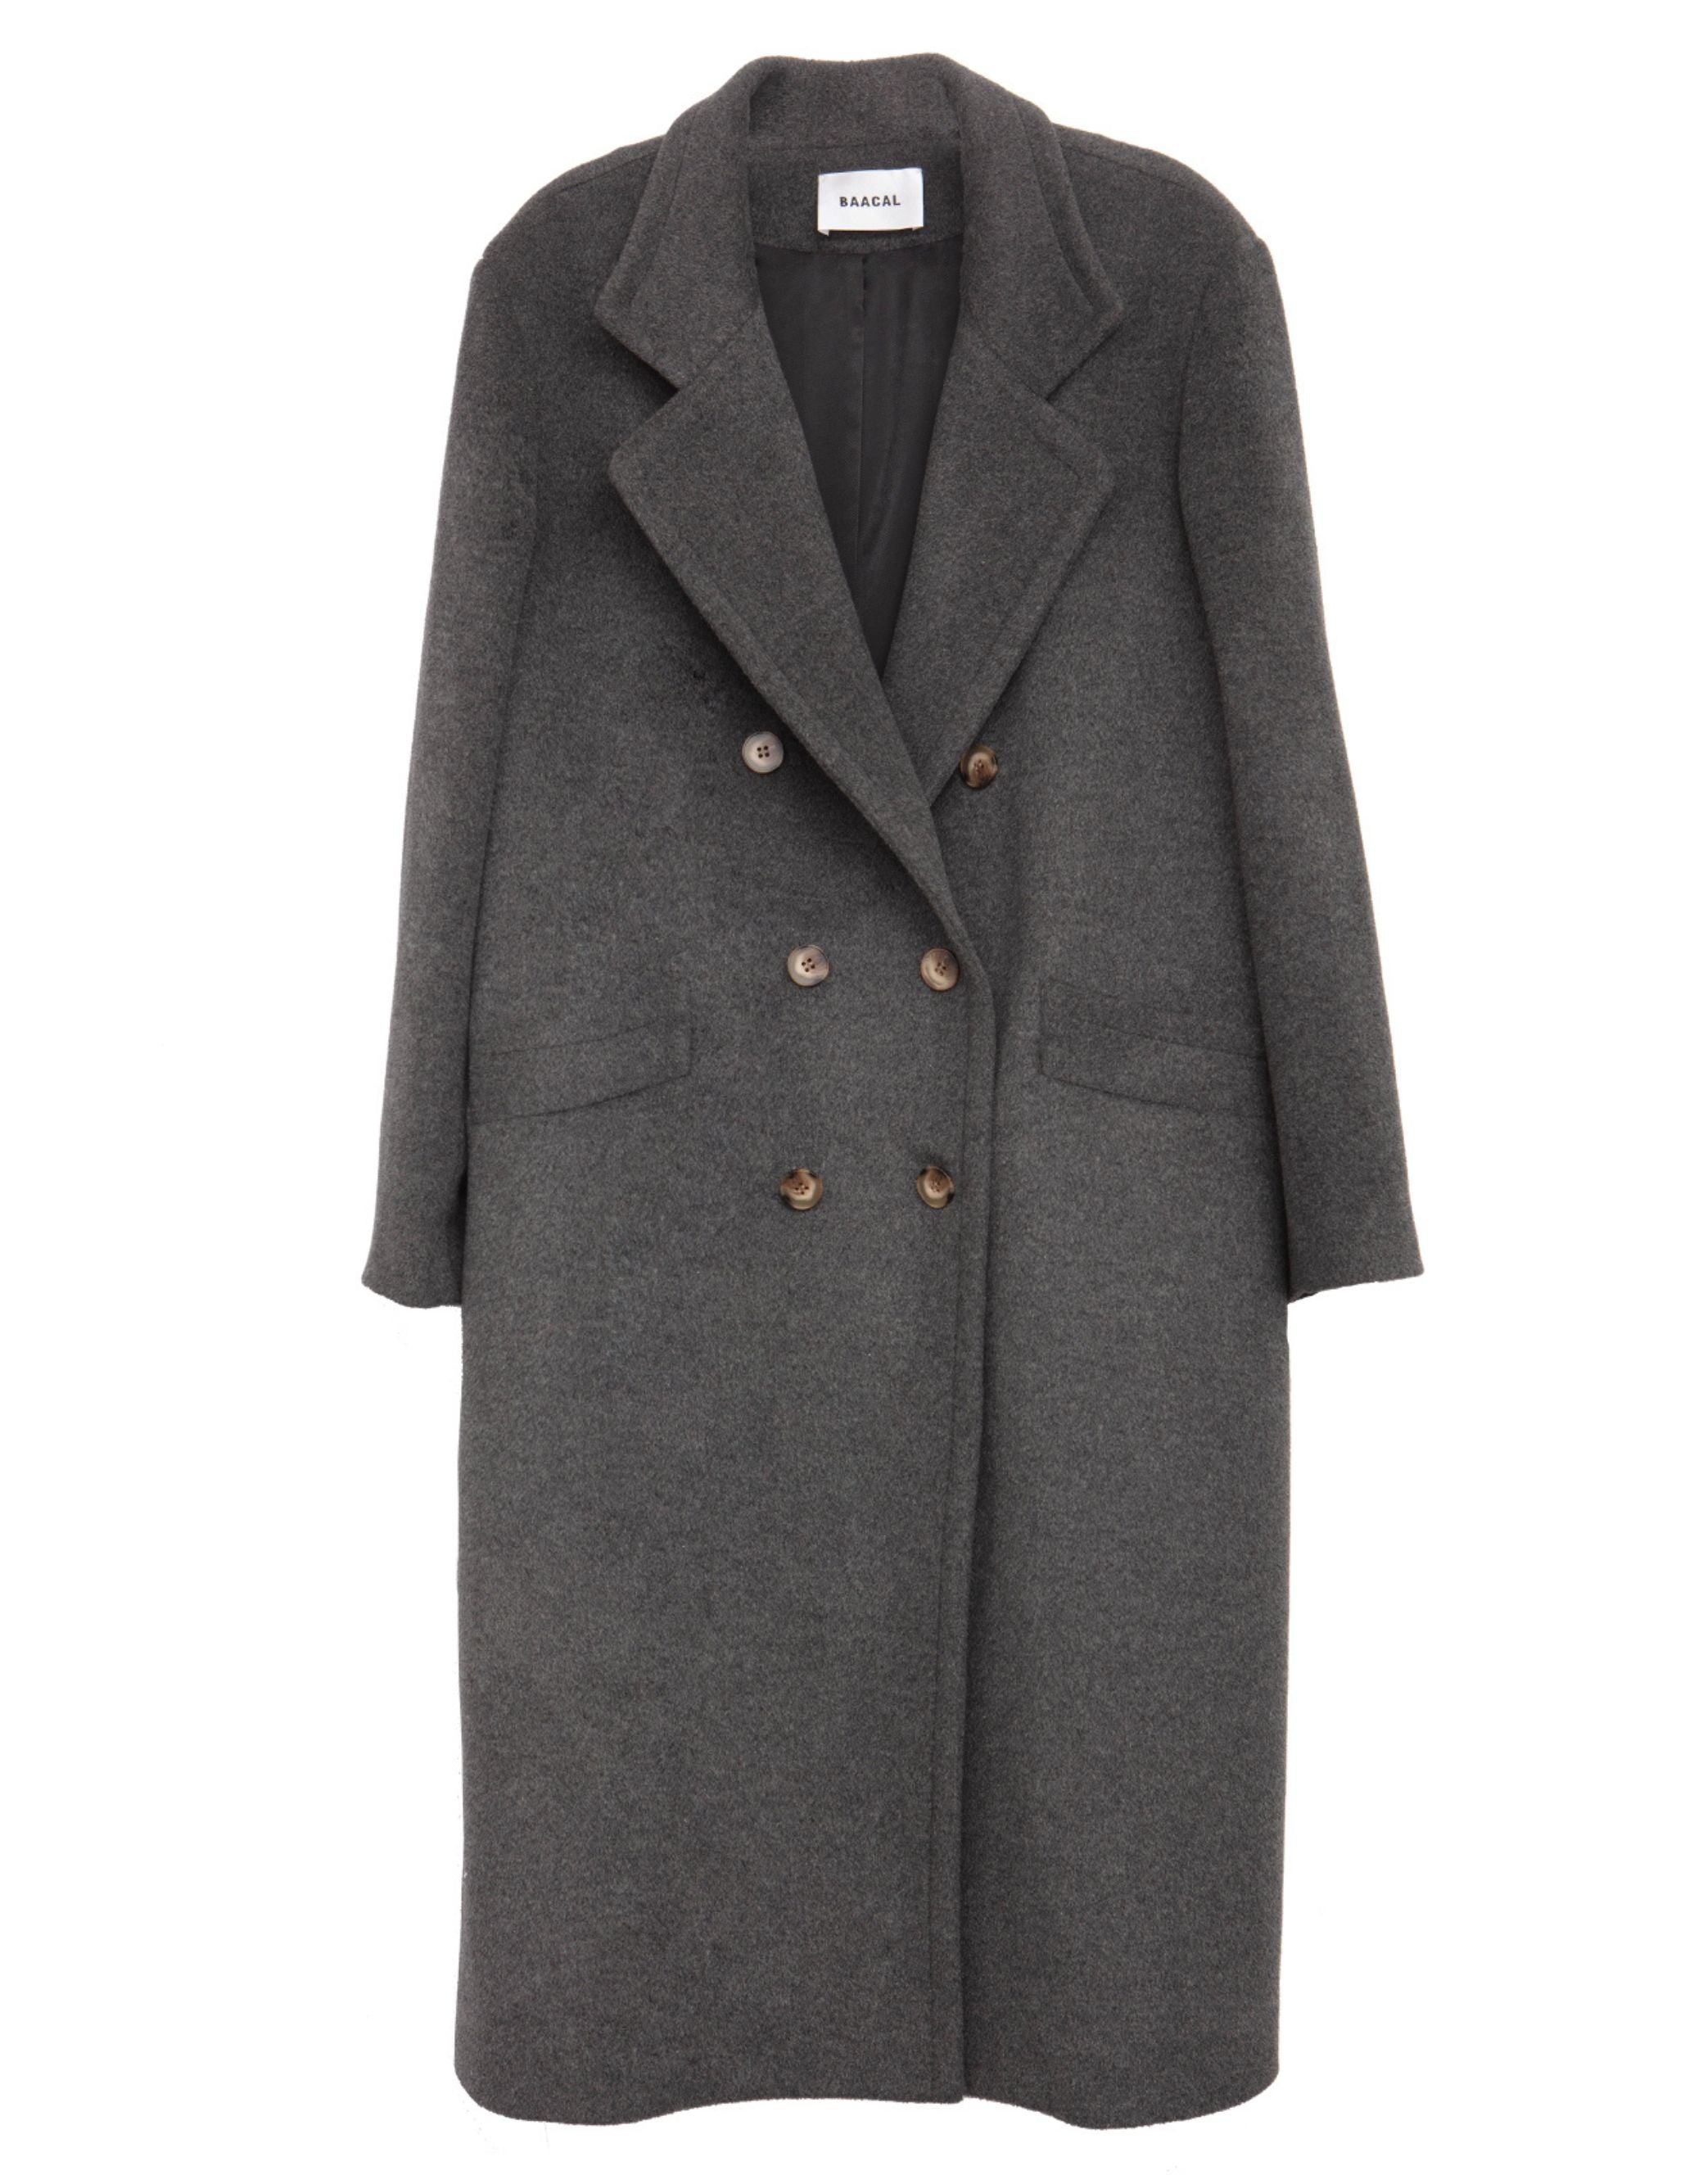 Double Breasted relaxed silhouette Car Coat in Grey. Designed to fit the "True Size Majority"